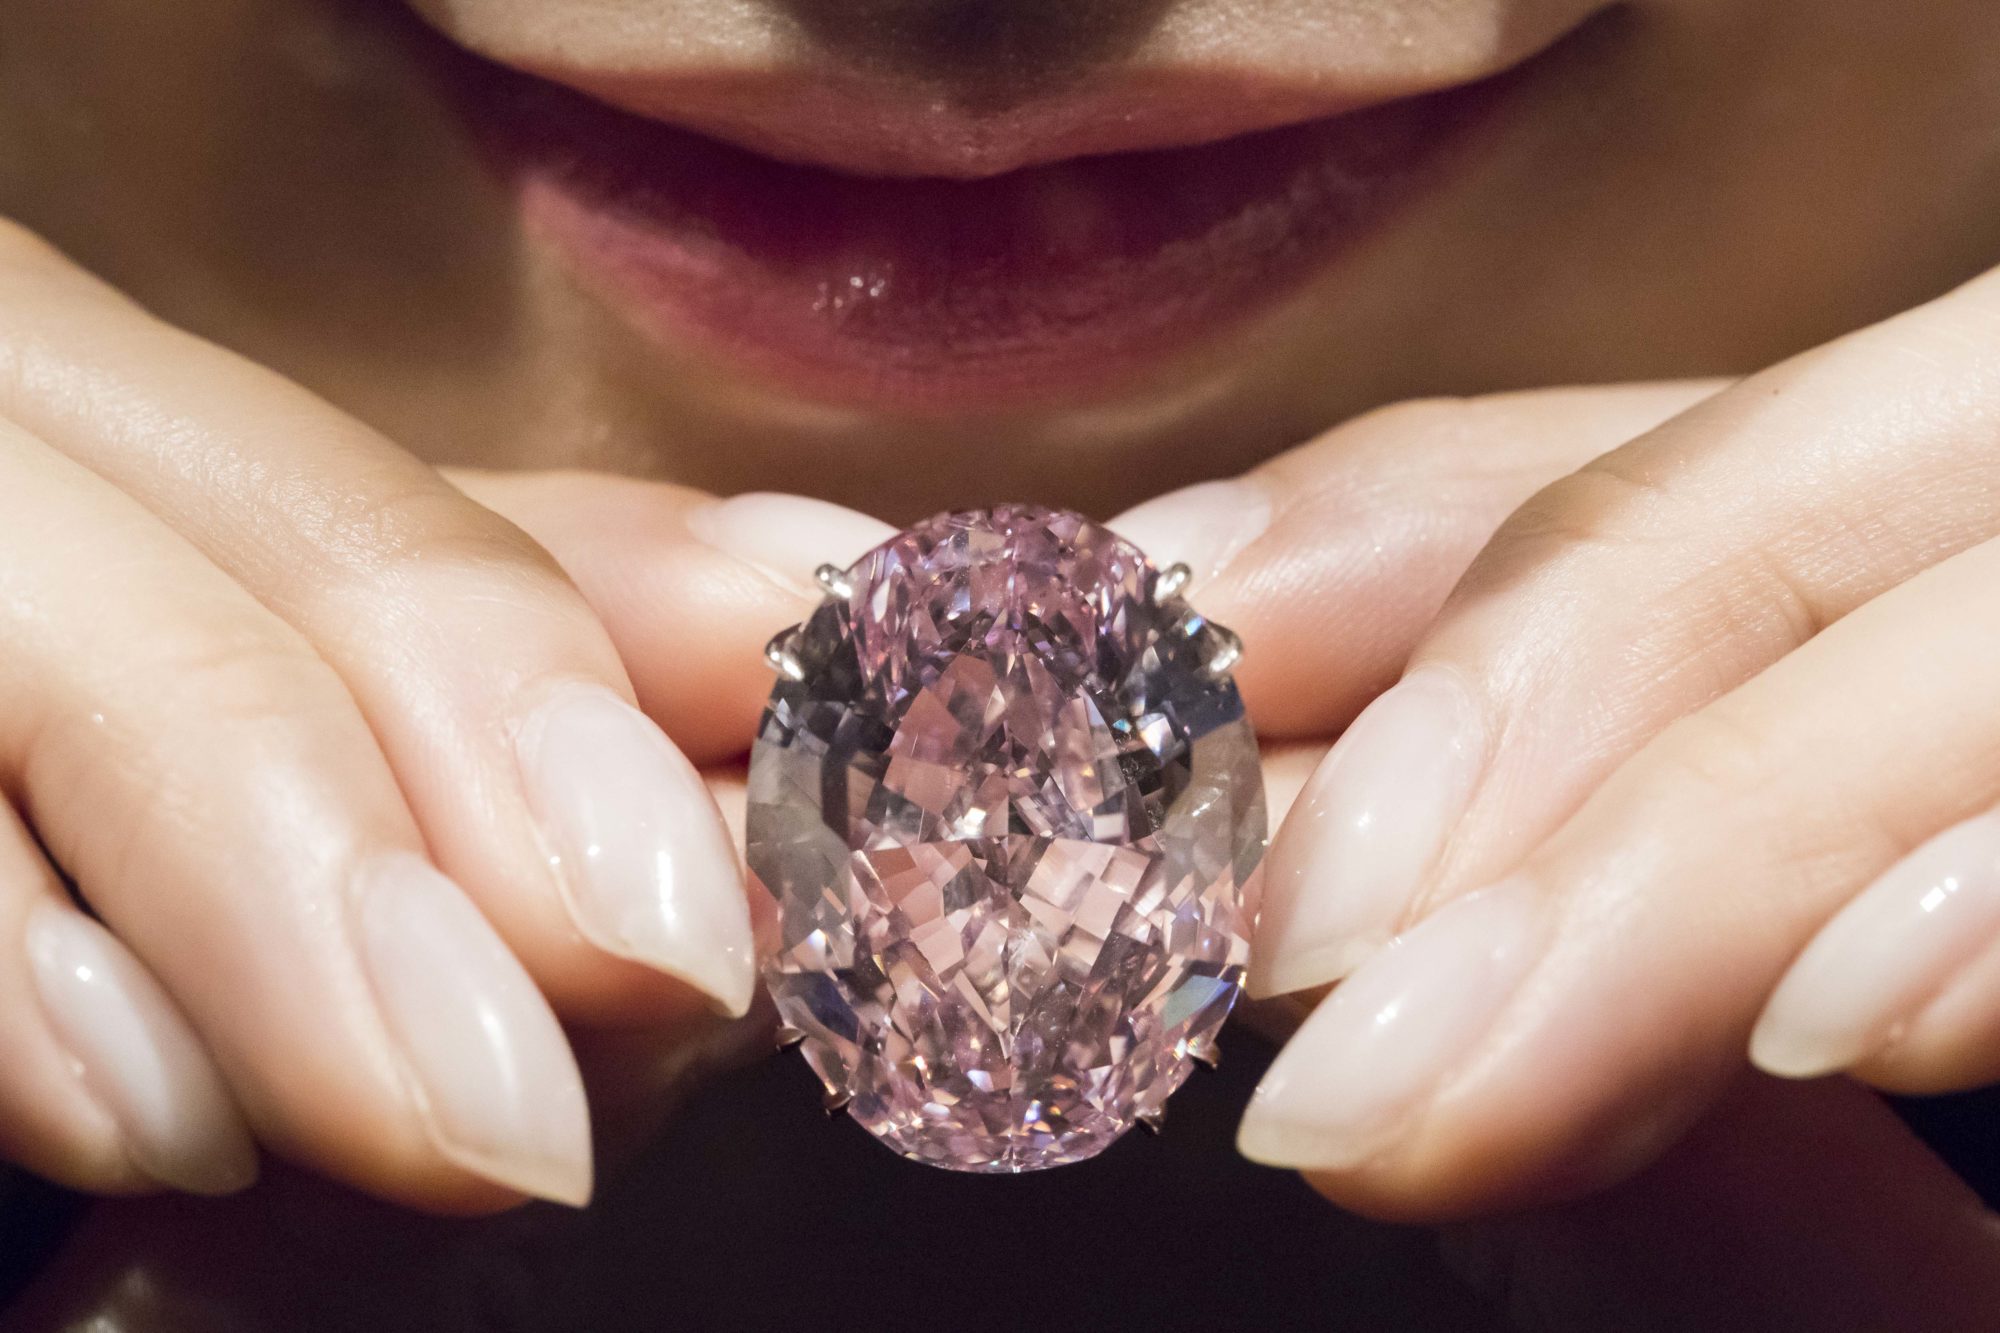 The World's Largest Uncut Diamond Fails to Sell at Sotheby's